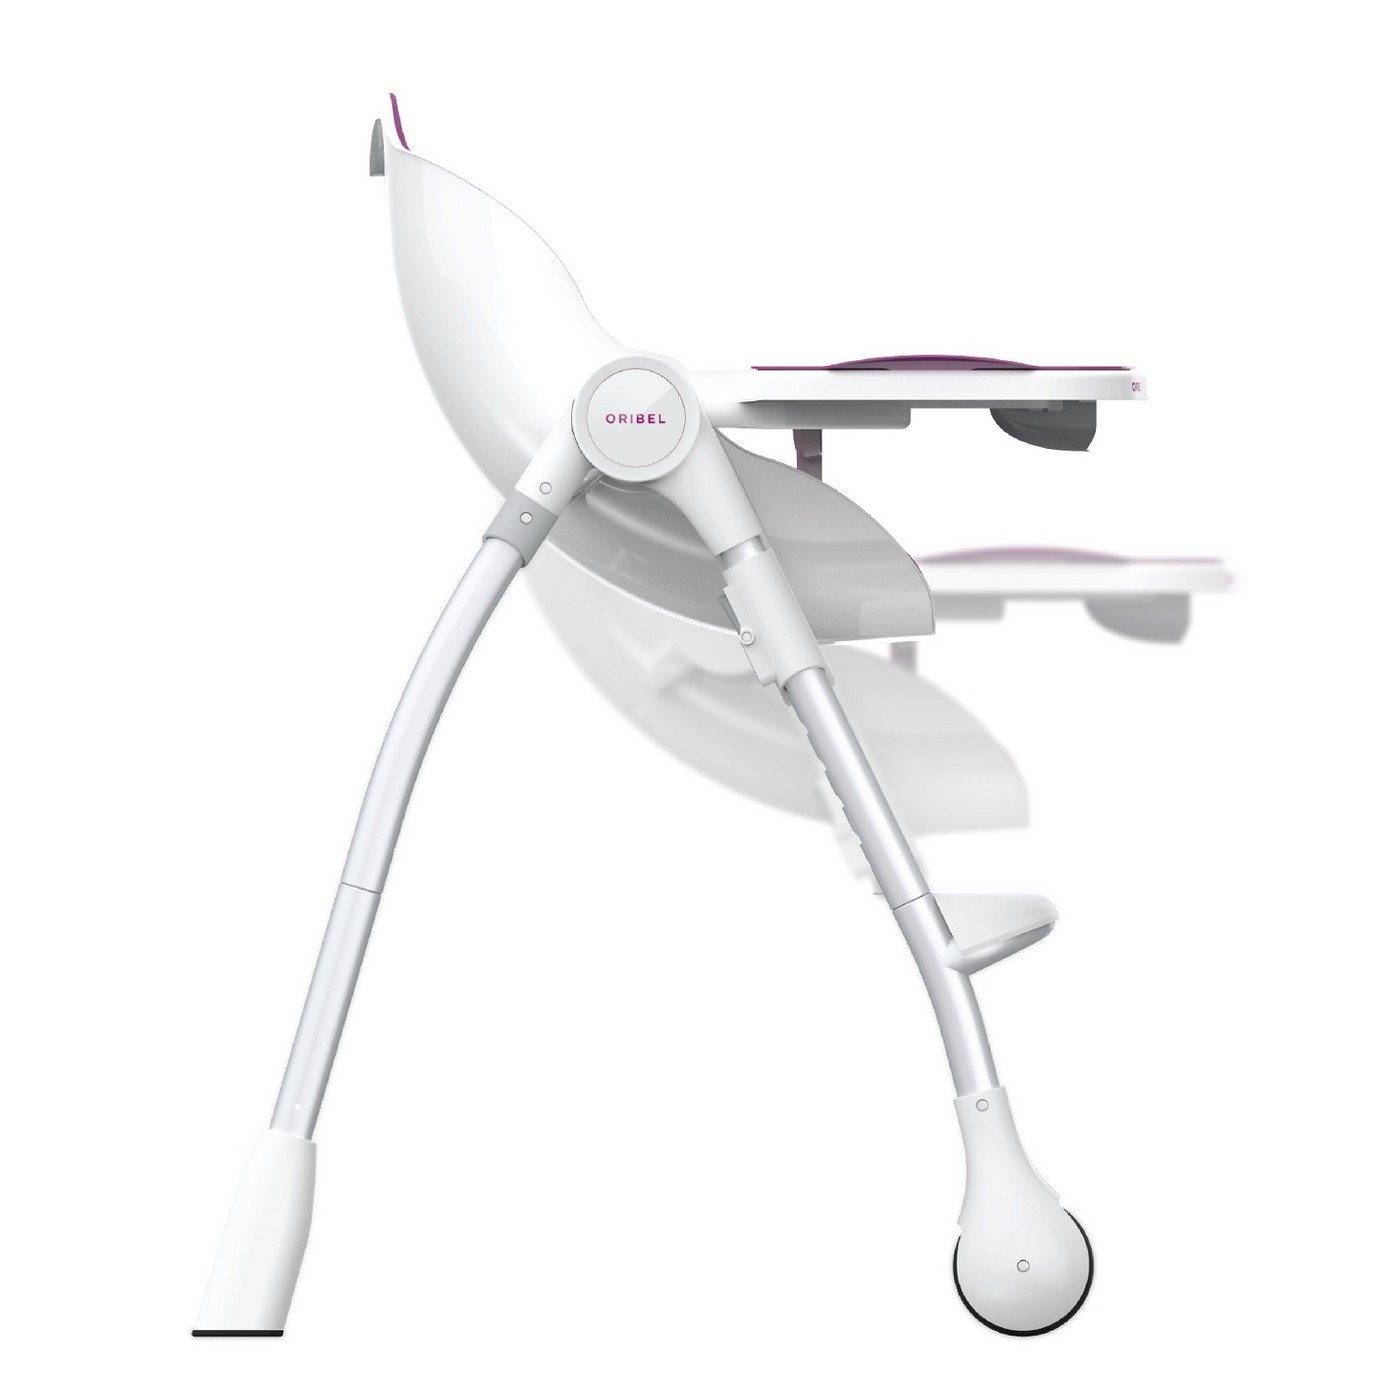 Baby Products Cocoon 3-Stage Toddler Feeding High Chair-Marshmallow